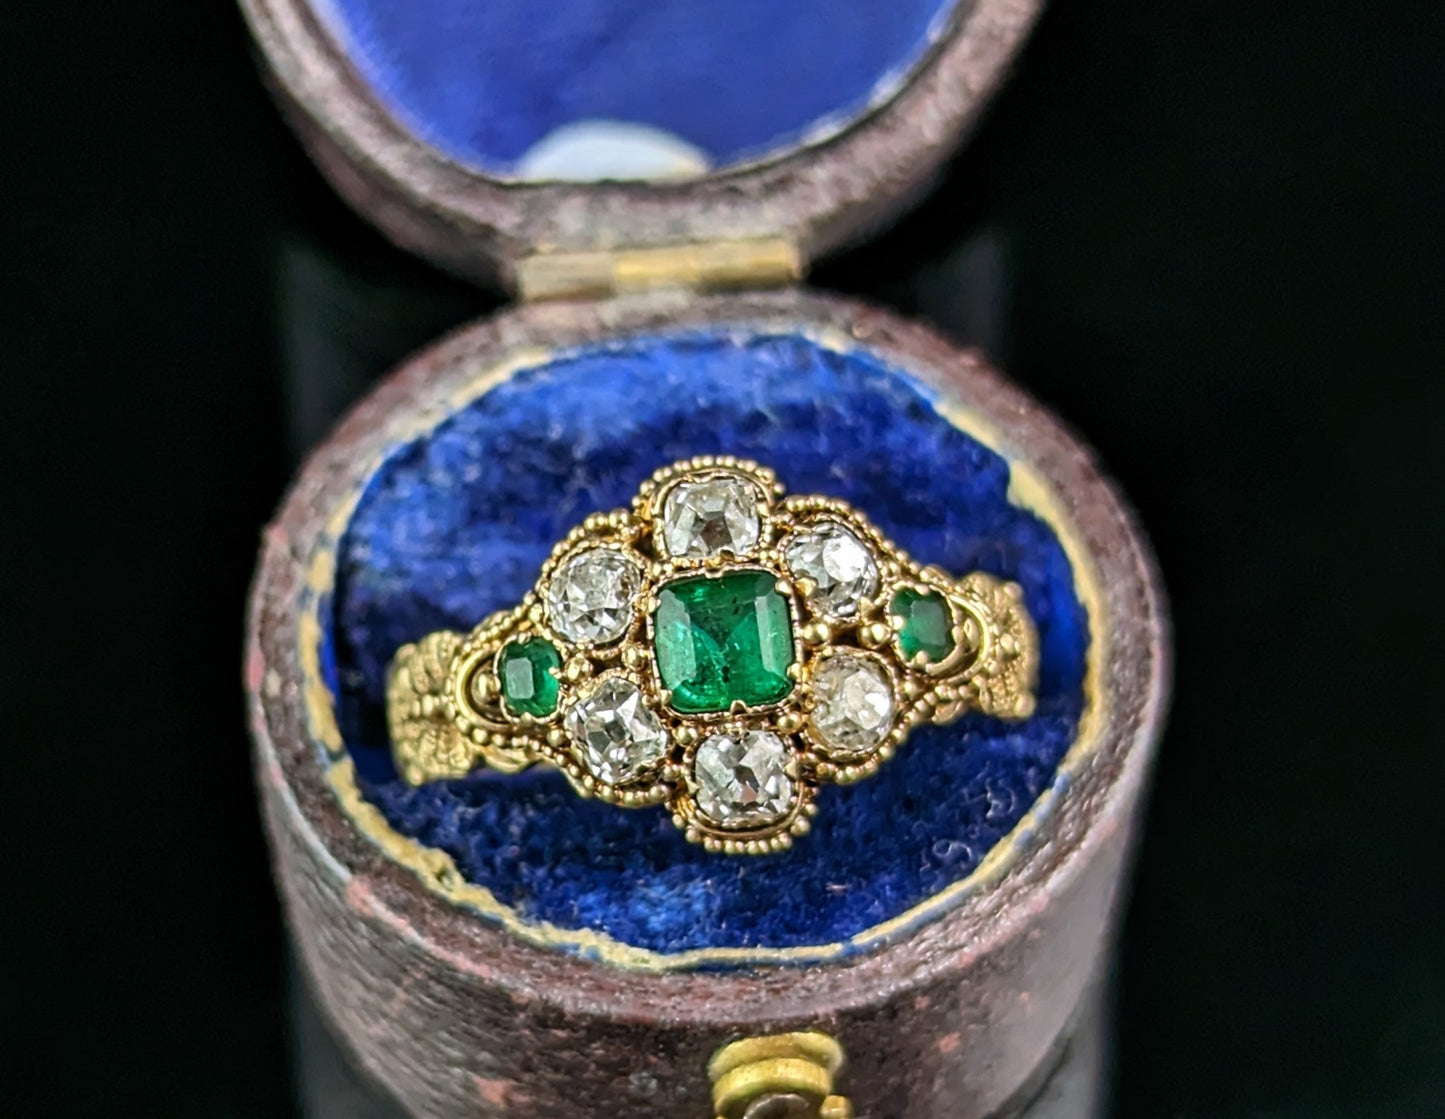 Antique Emerald and Diamond floral cluster ring, 18ct yellow gold